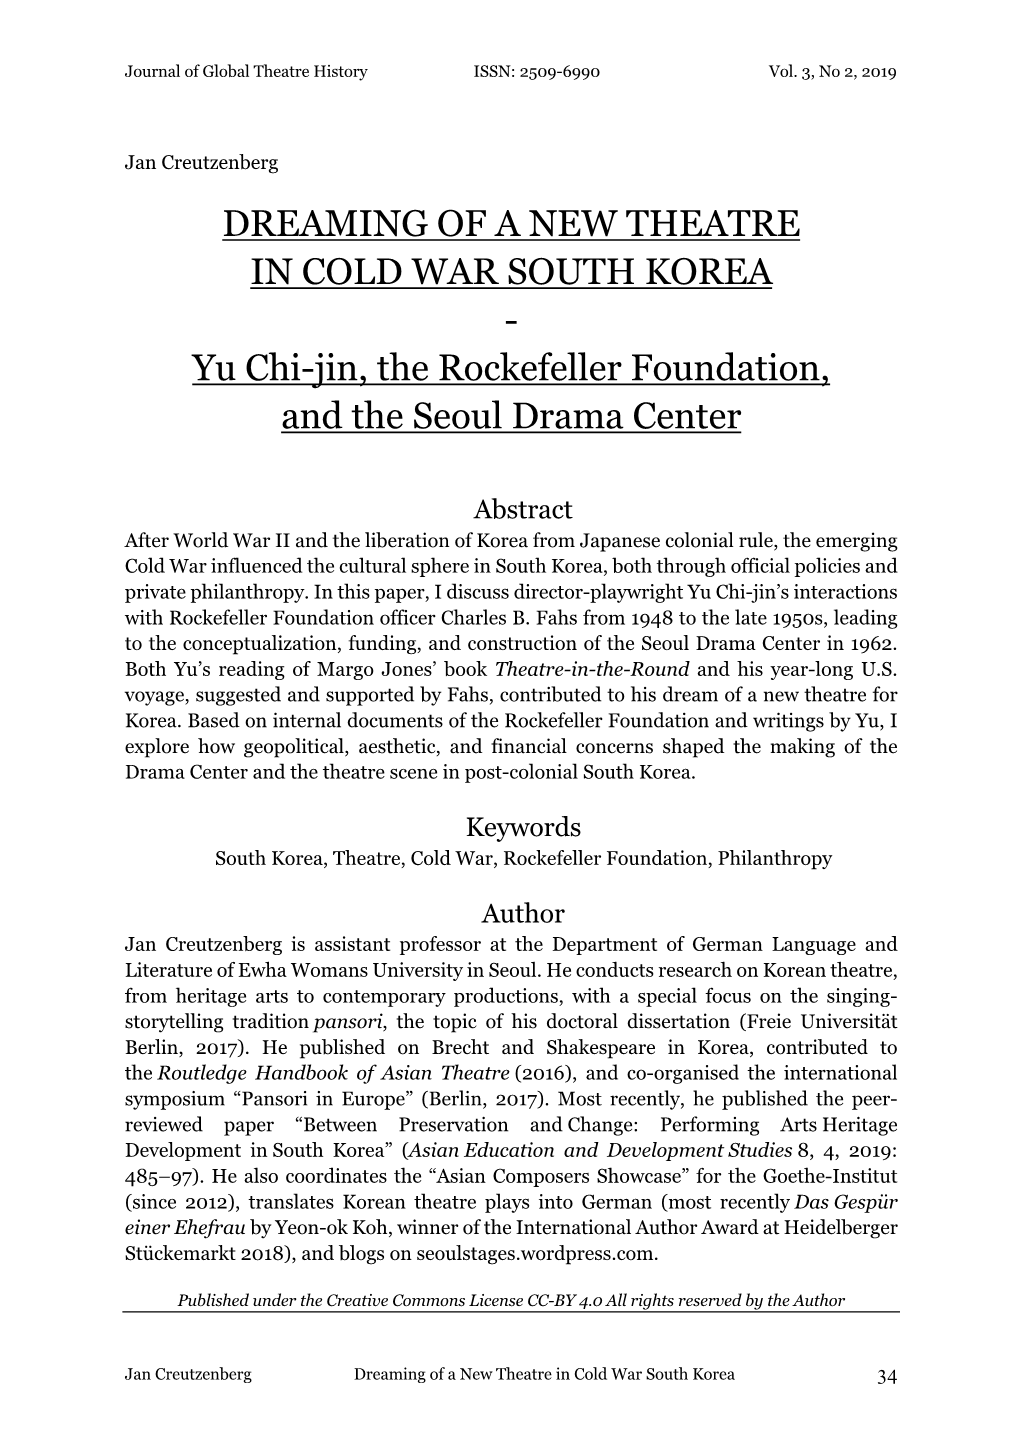 Yu Chi-Jin, the Rockefeller Foundation, and the Seoul Drama Center